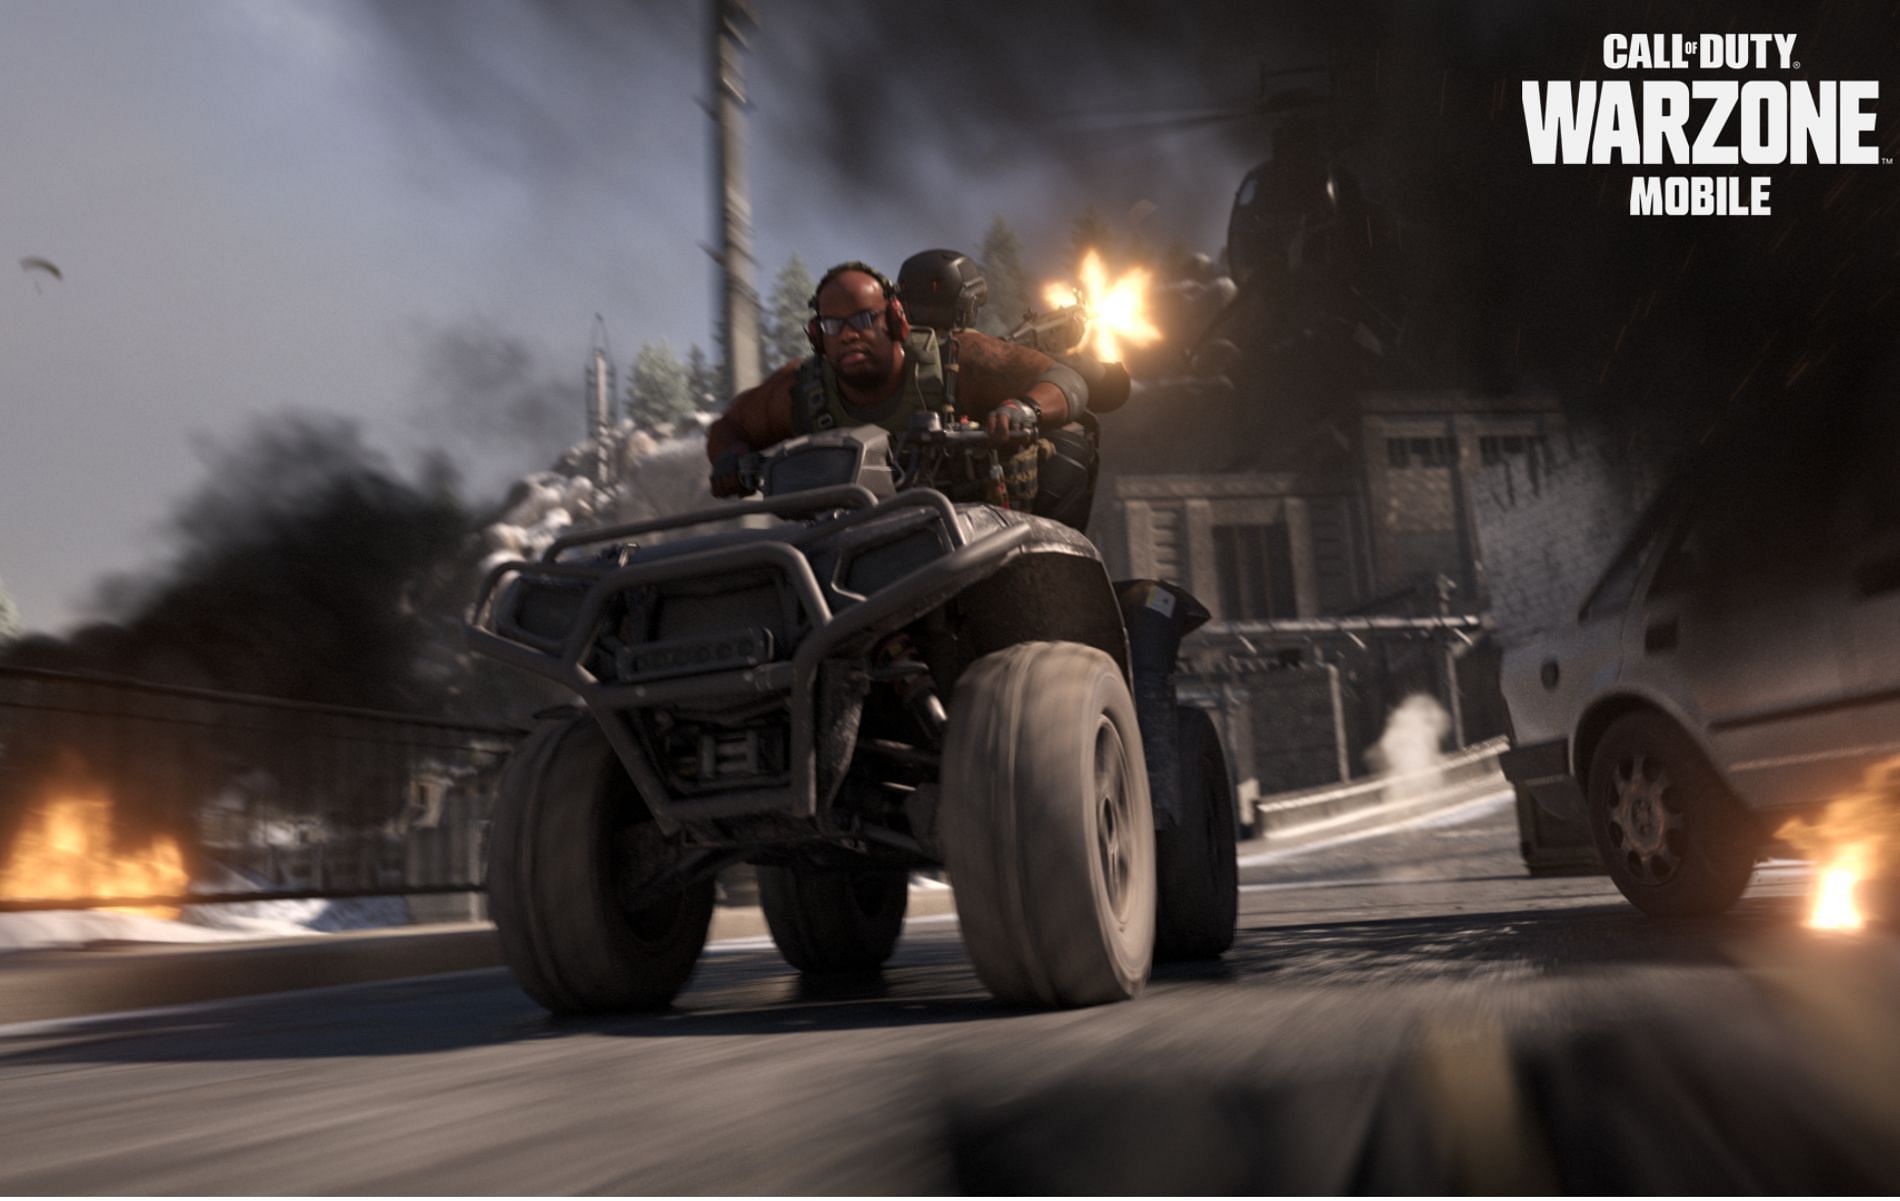 The ATV will be available in Warzone Mobile (Image via Activision)